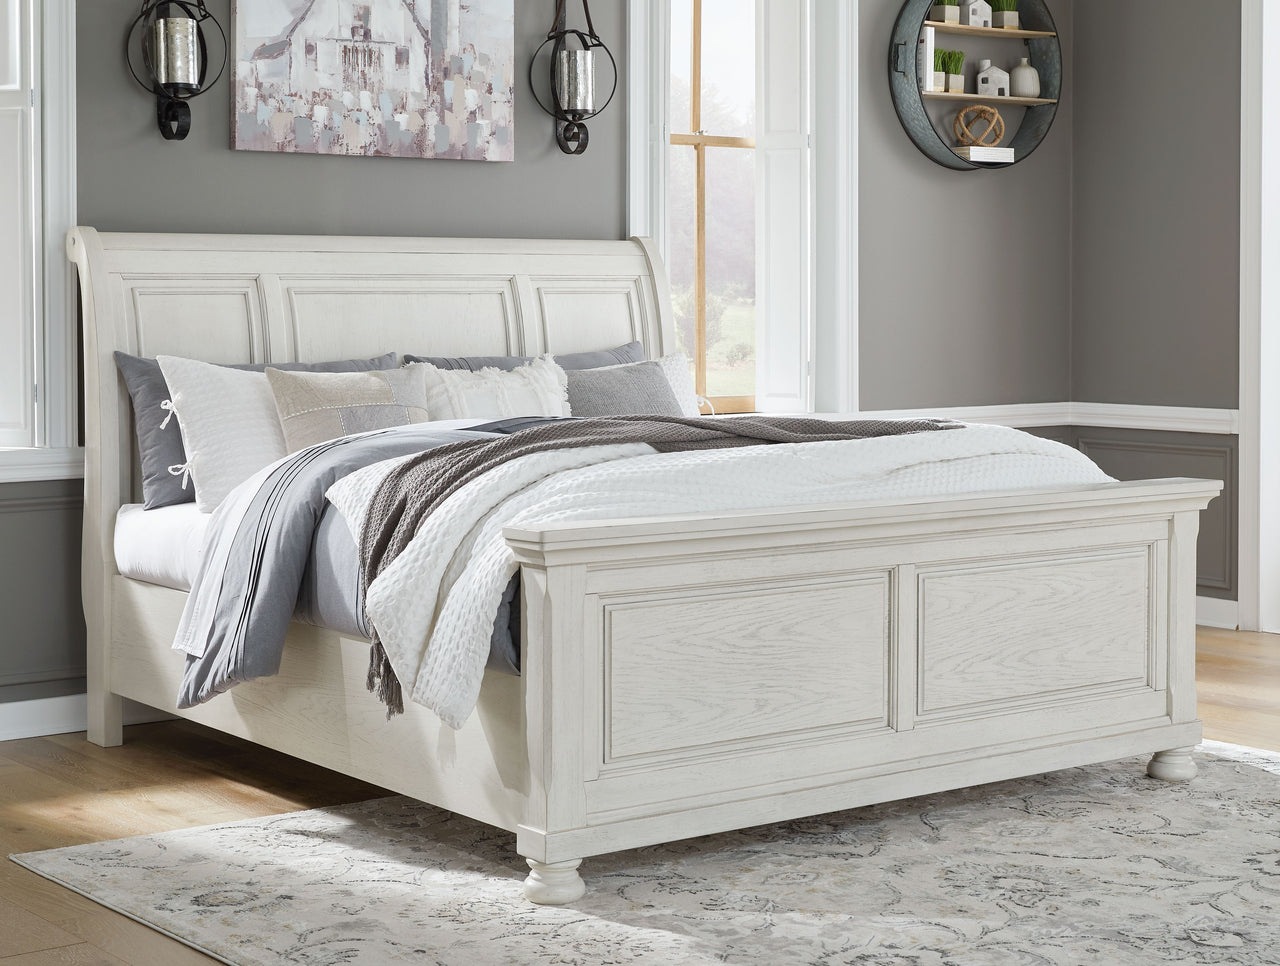 Robbinsdale - Sleigh Bed - Tony's Home Furnishings